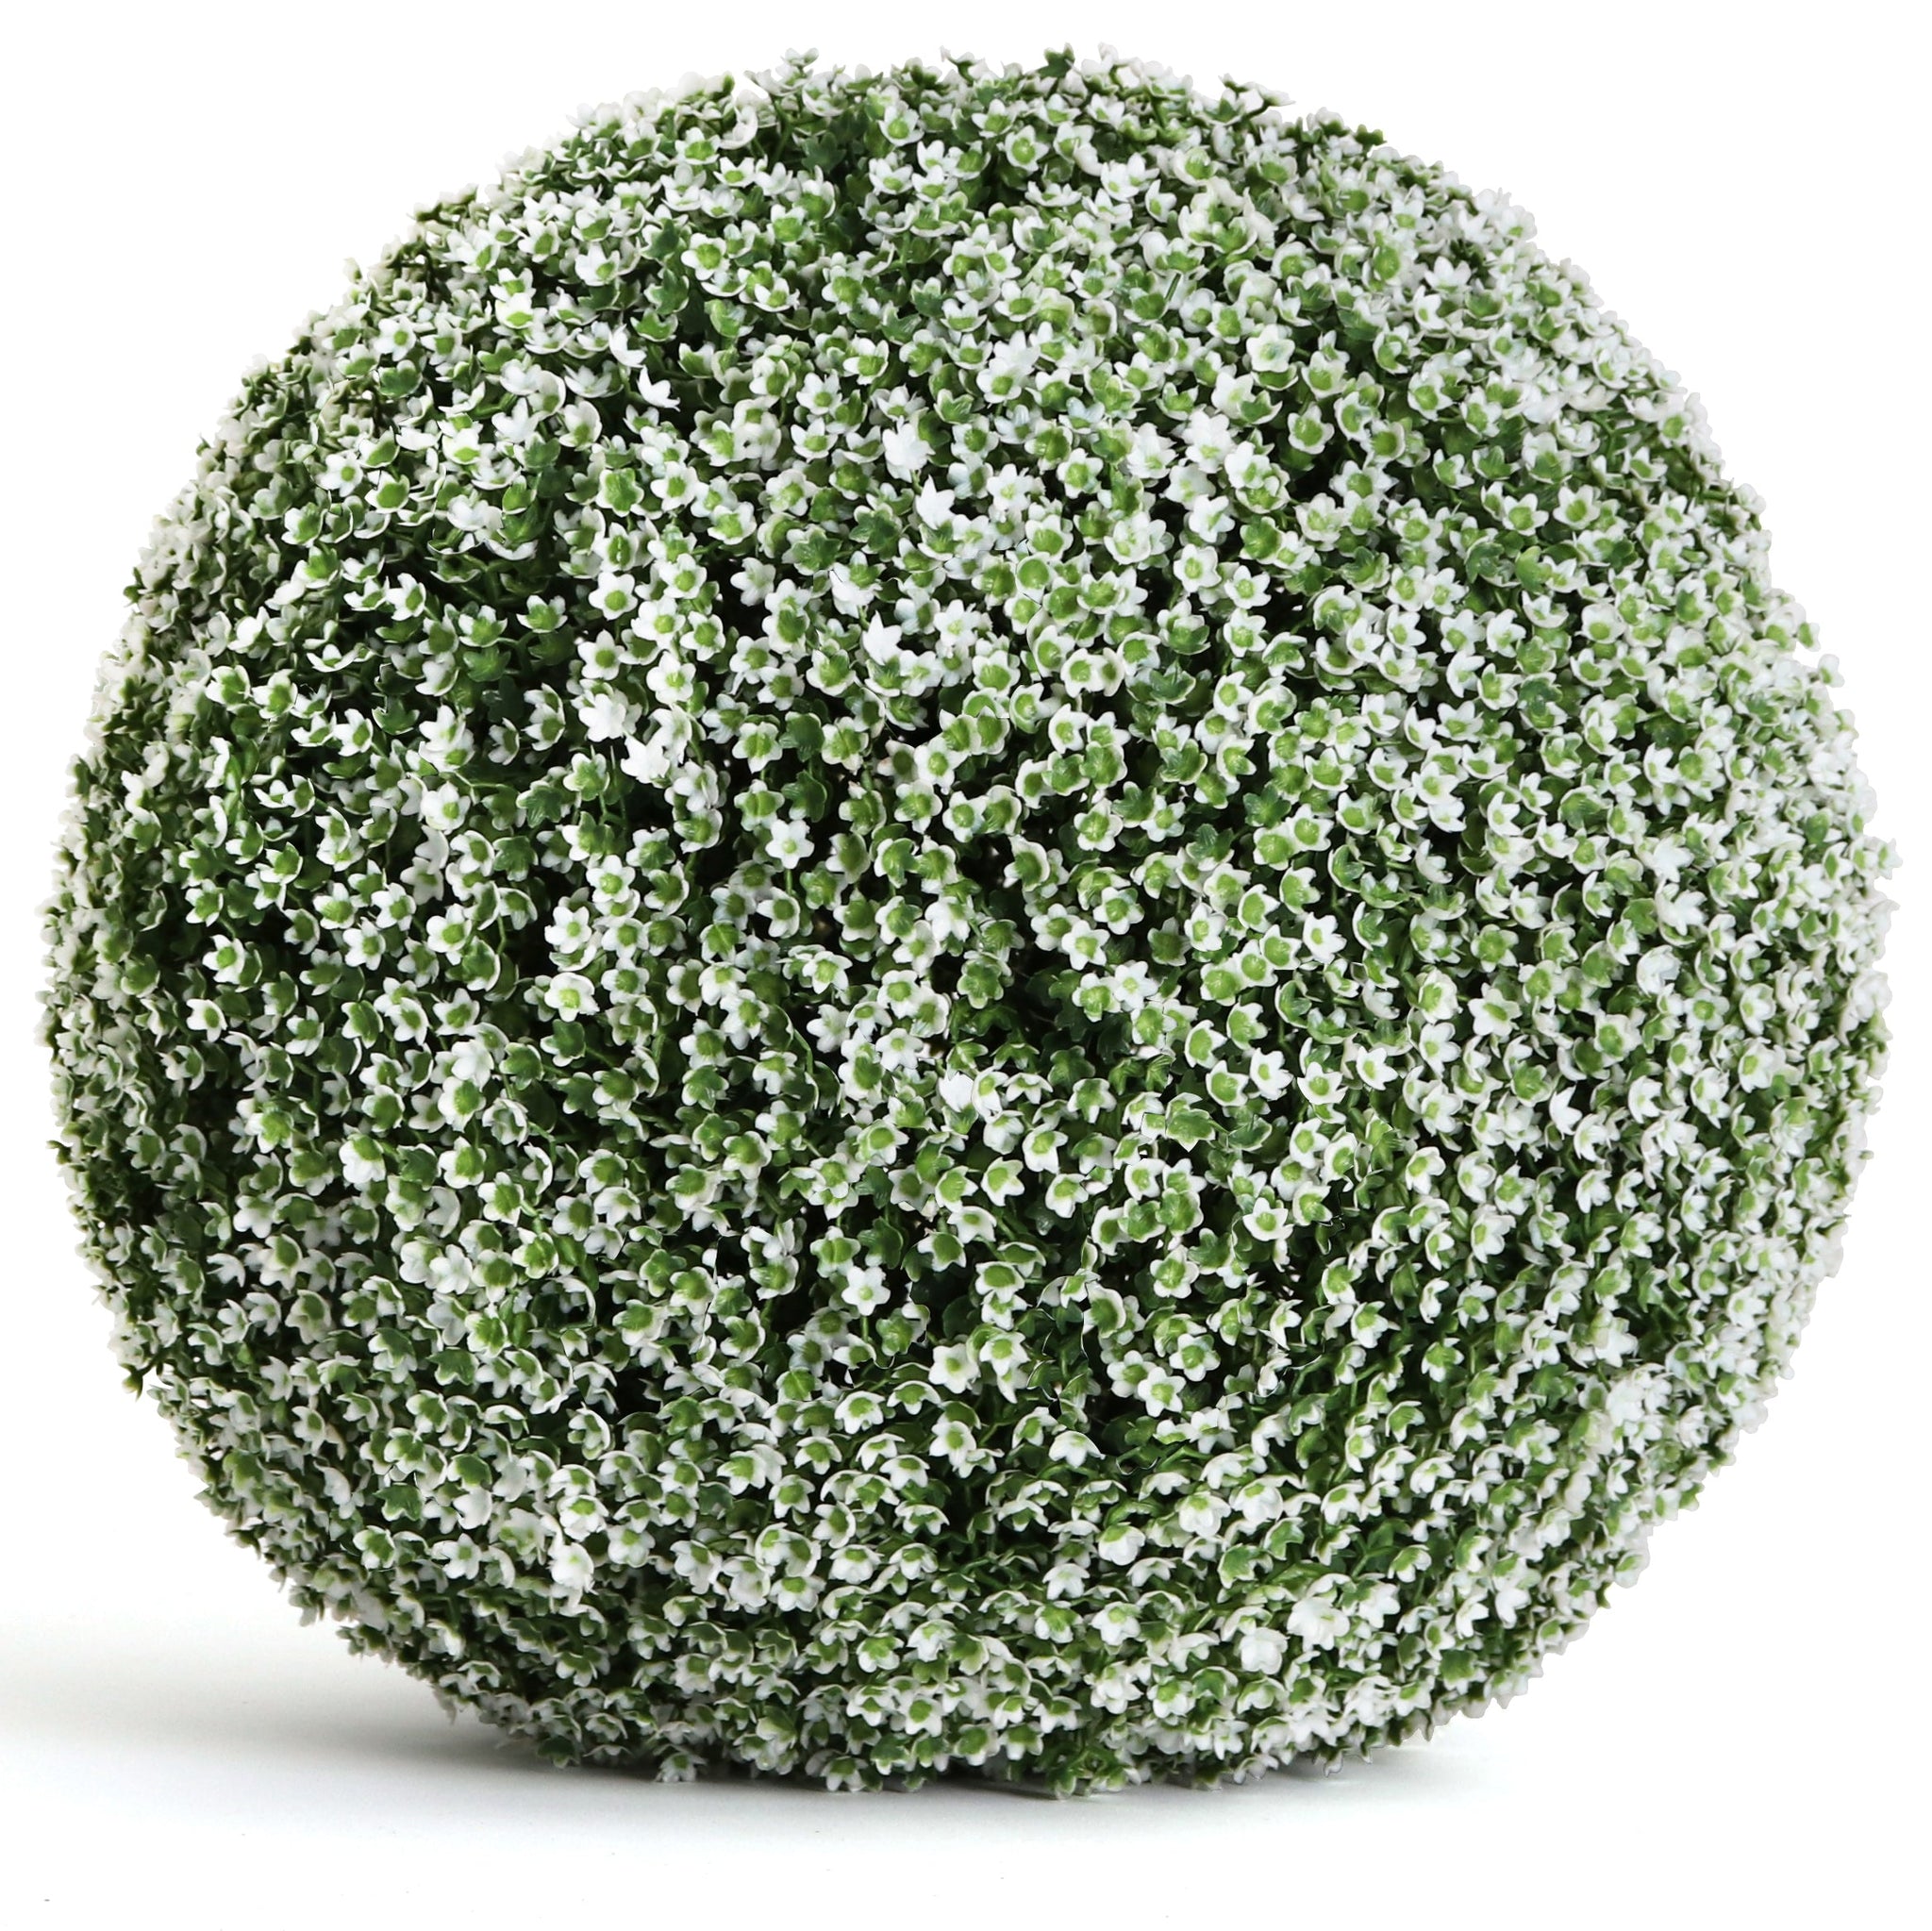 3rd Street Inn Baby's Breath Topiary Ball - 19 inch Artificial Topiary Plant - Wedding Decor - Indoor/Outdoor Artificial Plant Ball - Topiary Tree